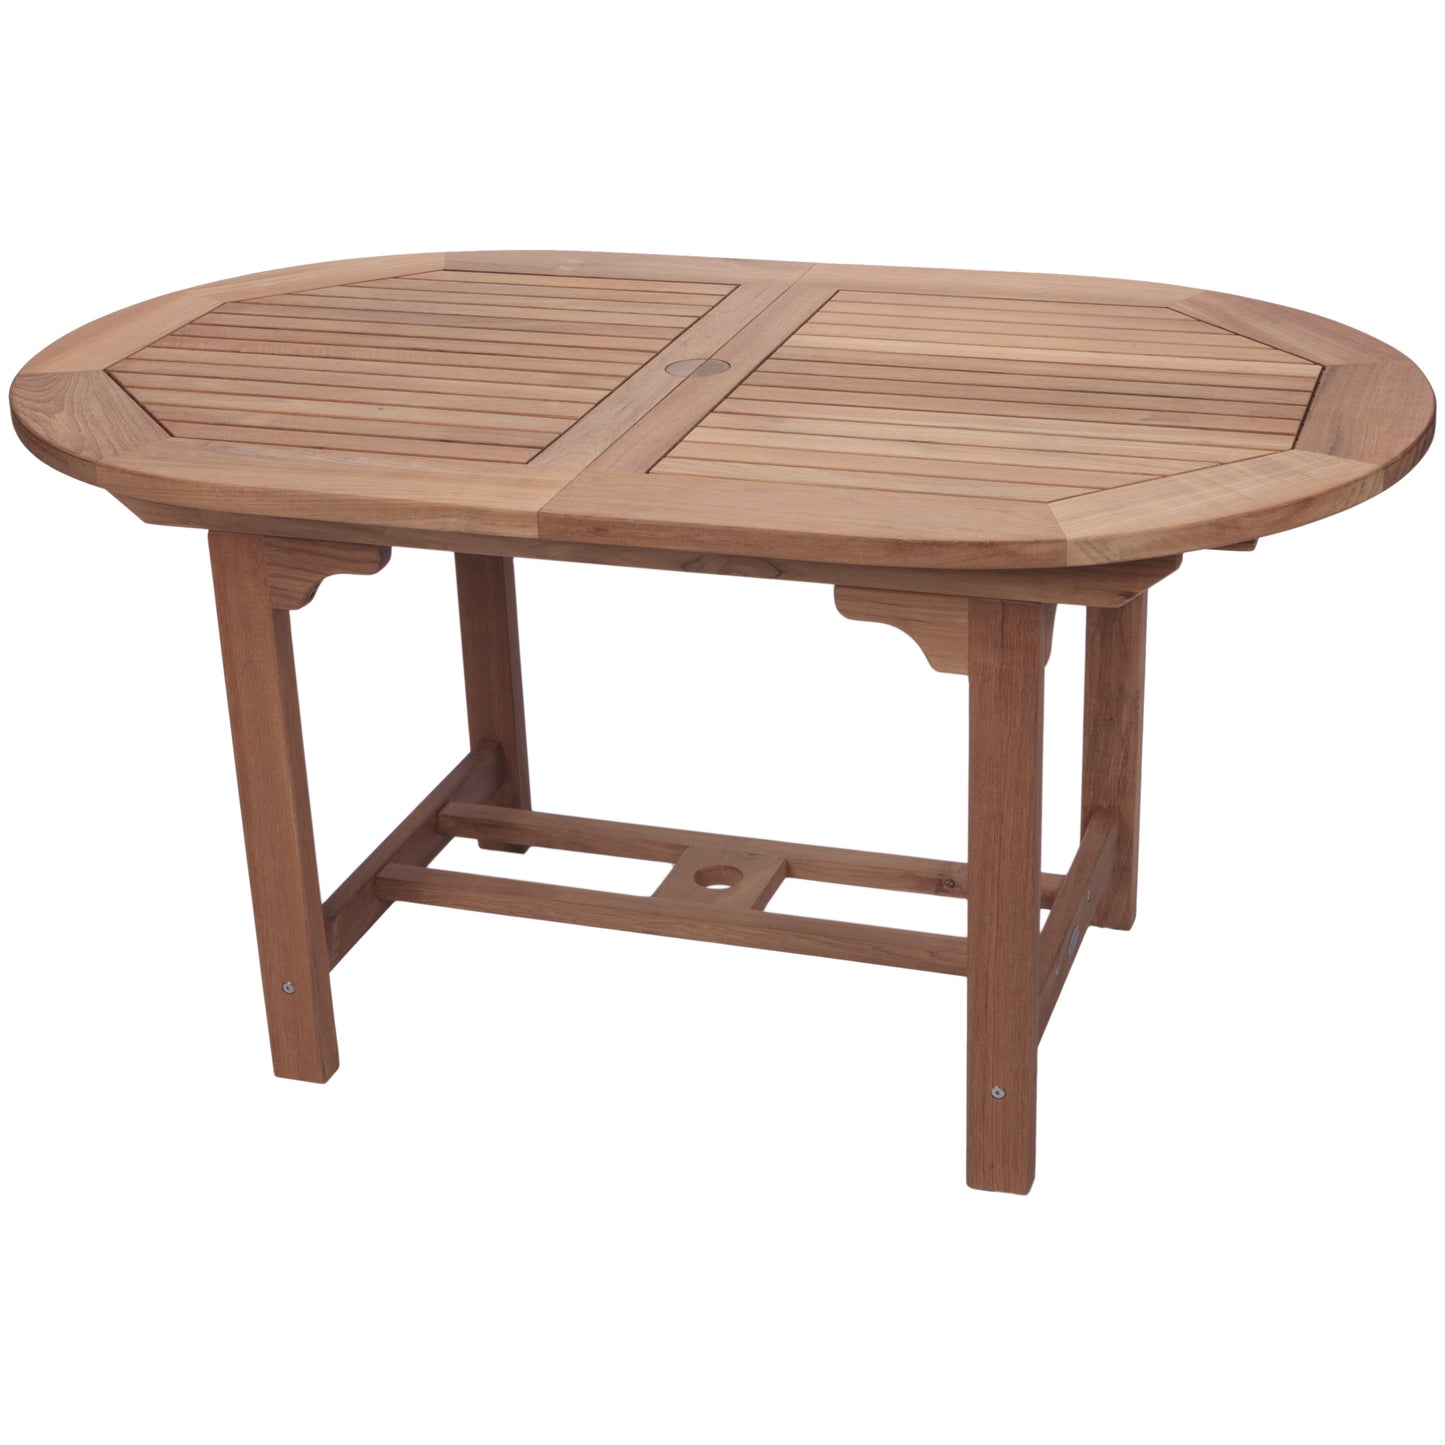 Royal Teak 60"-78" Oval Family Expansion Table with 6 Sailmate Chairs